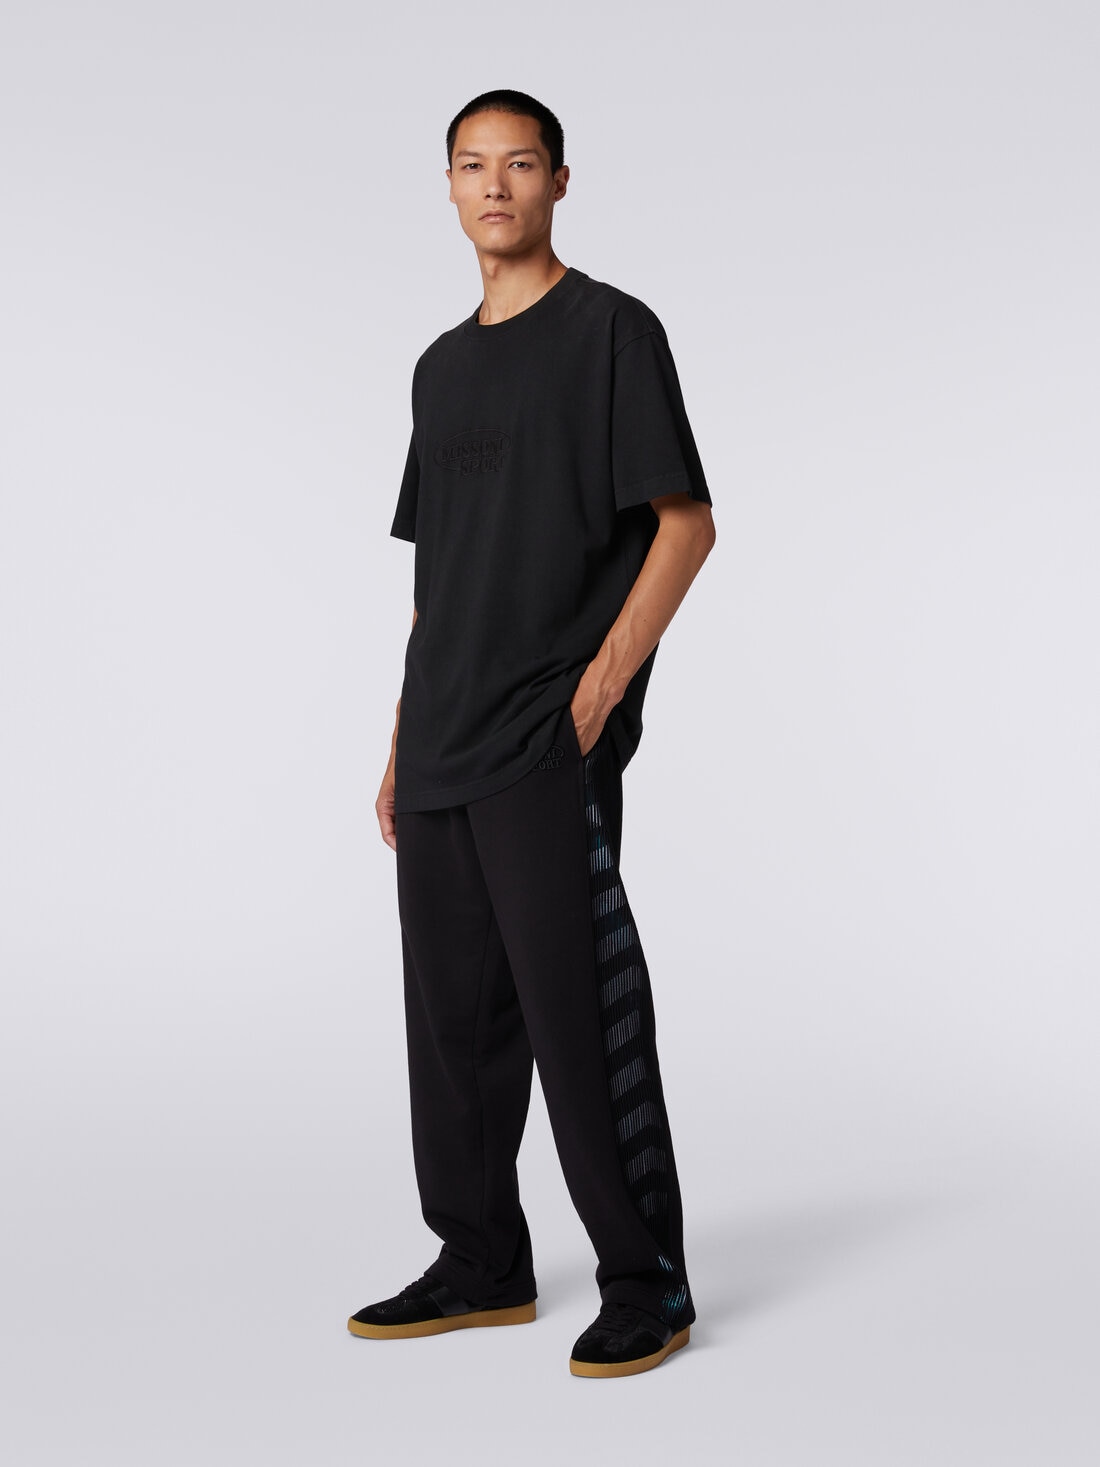 Trousers in fleece with logo and knitted side bands, Black    - TS24SI03BJ00INS91J4 - 2